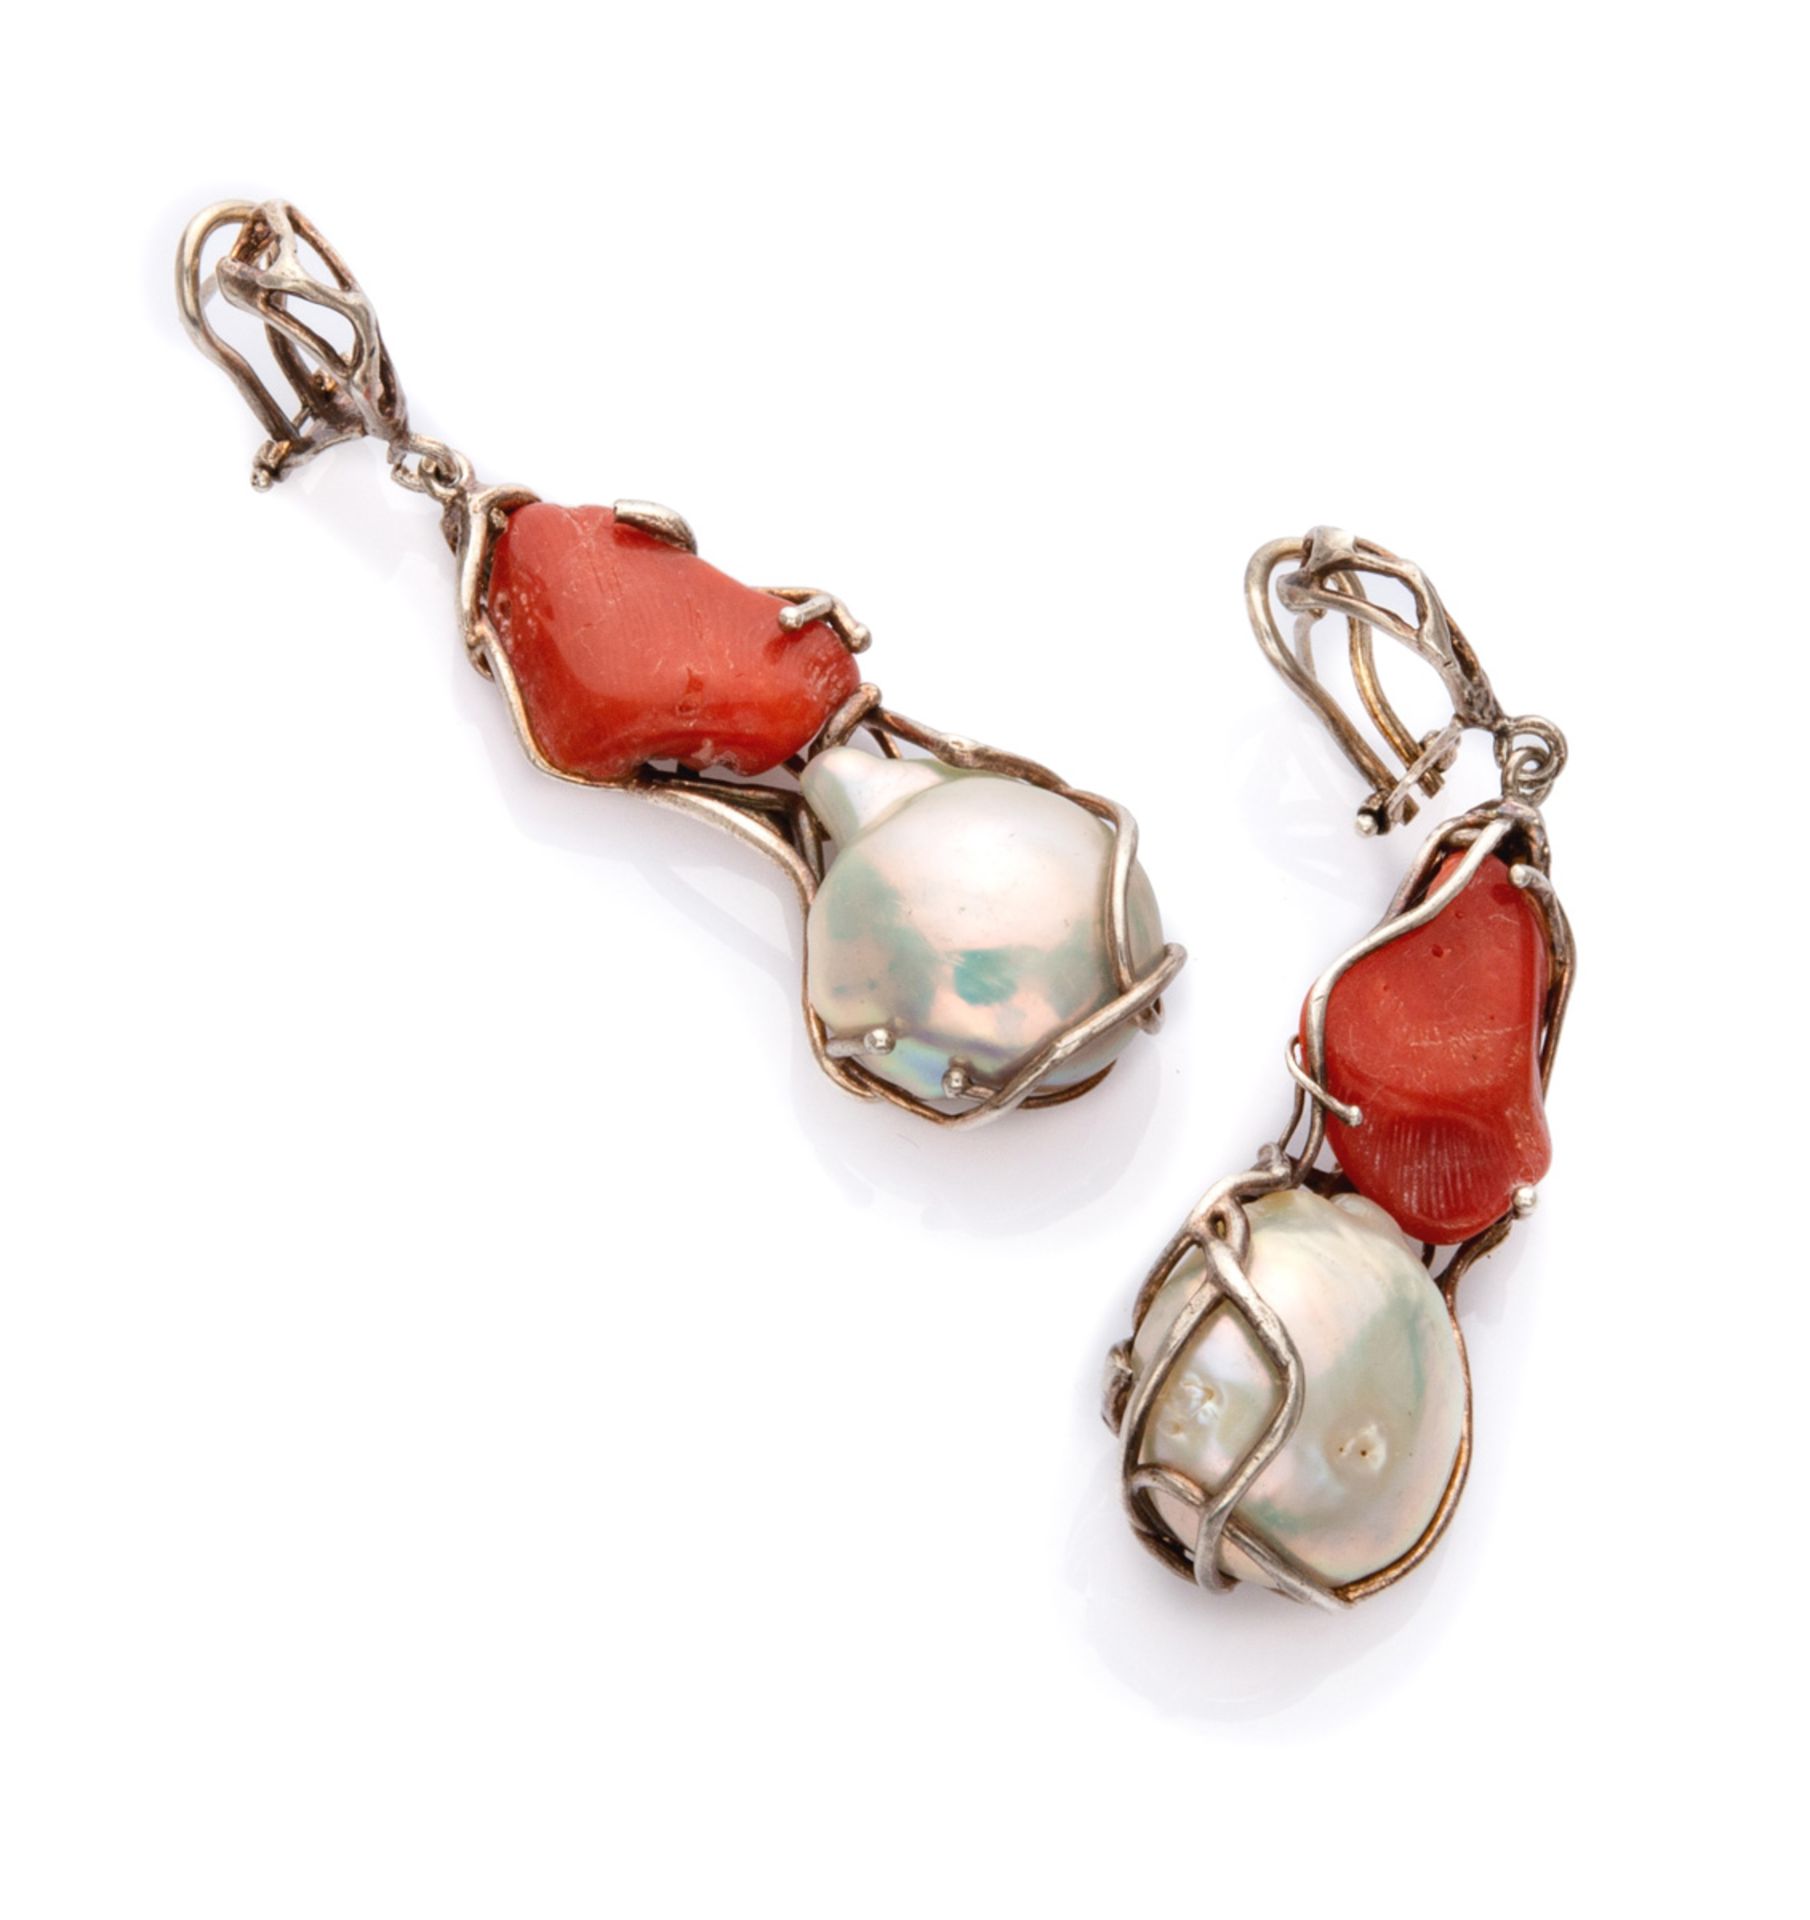 FANTASY EARRINGS in silver 800, decorated with pearls and red coral. Length cm. 6,00, total weight